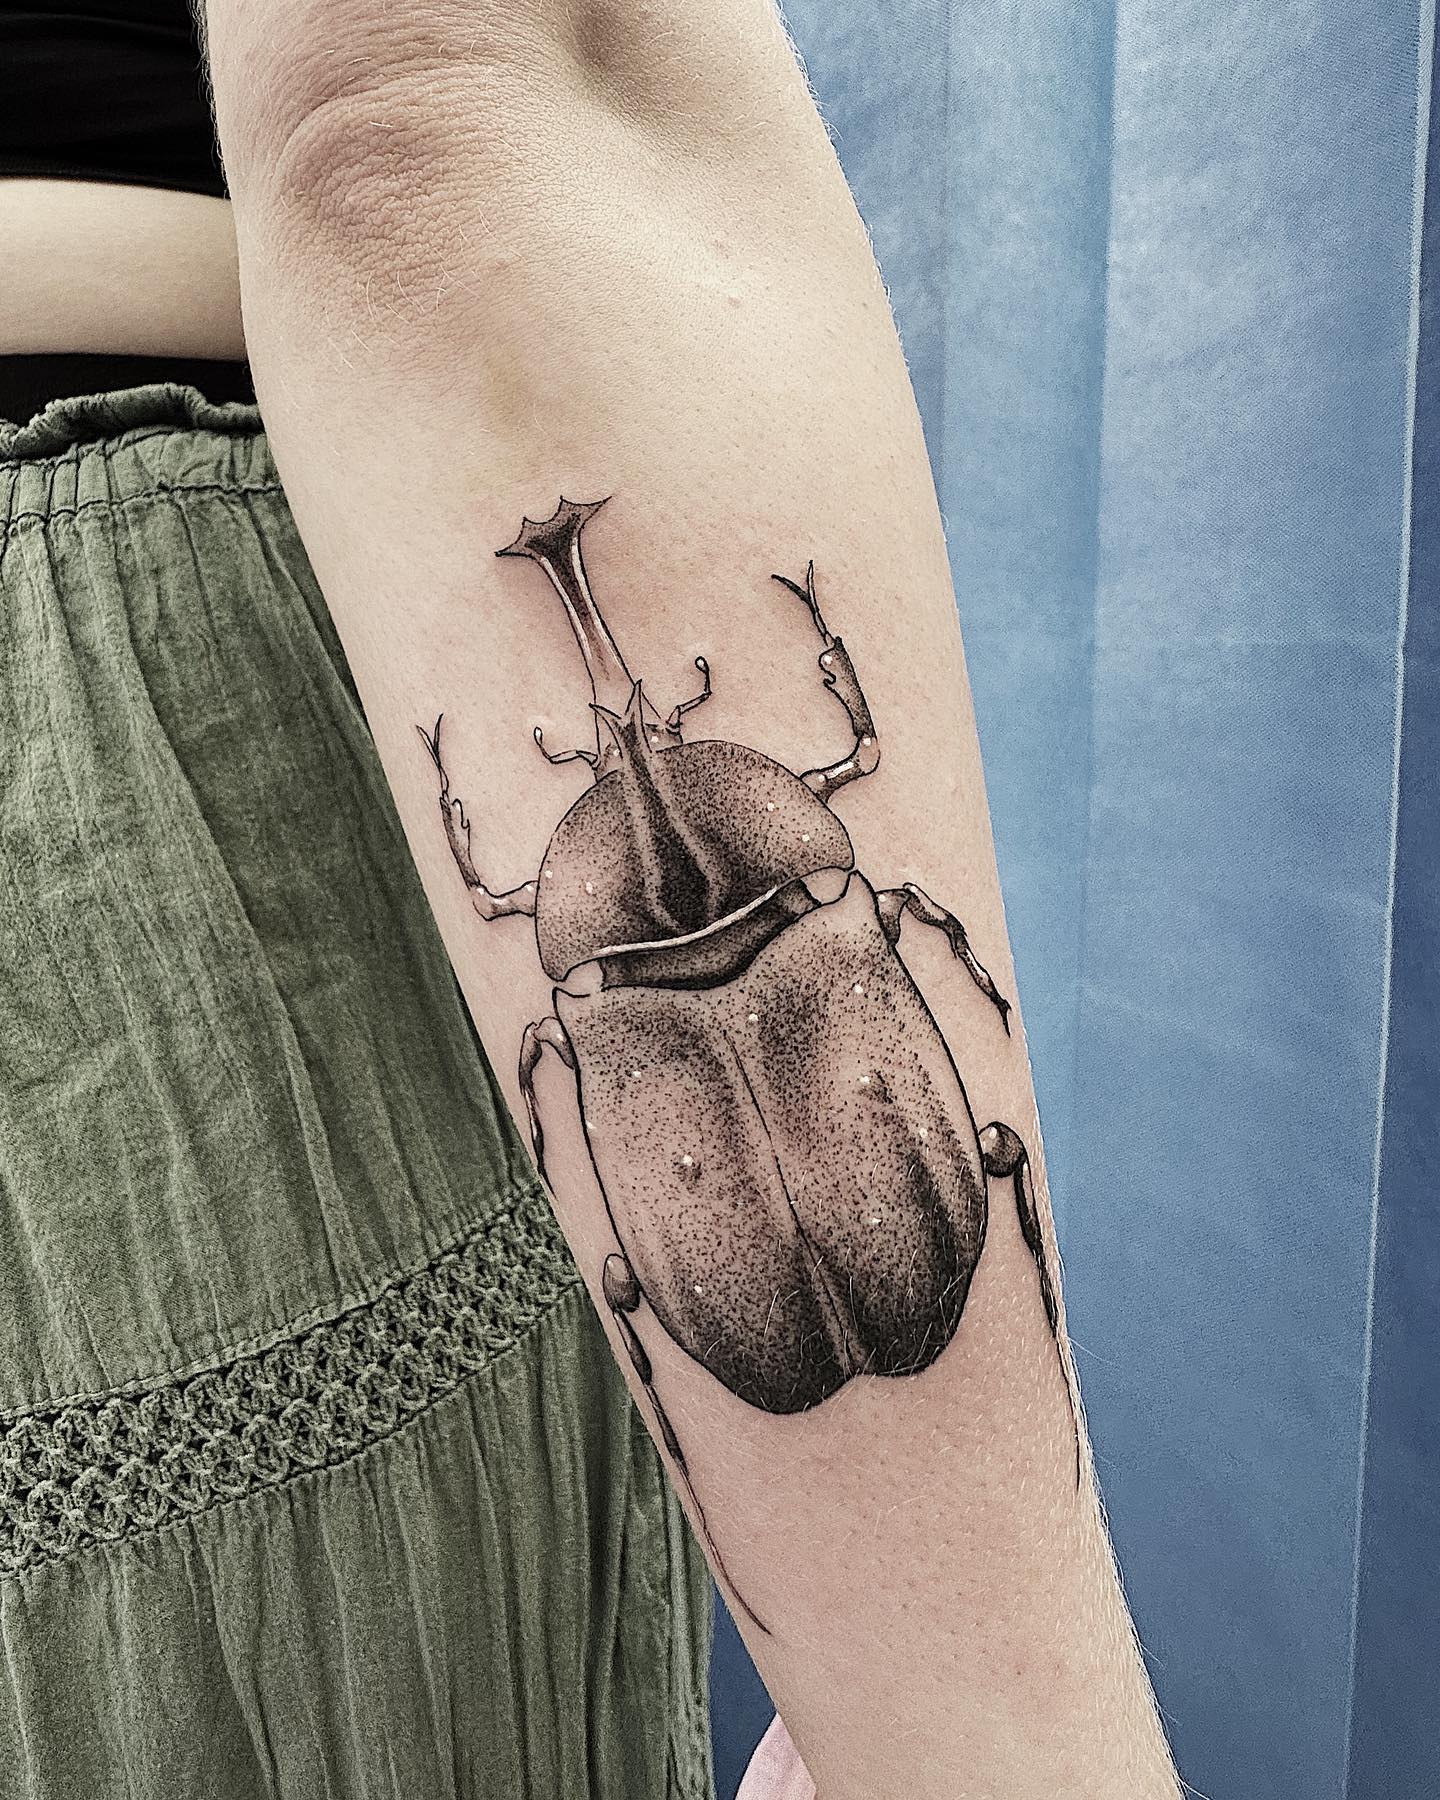 Hercules Beetle Tattoos (original posted on Twitter) by Angel_Dutch.A.D --  Fur Affinity [dot] net